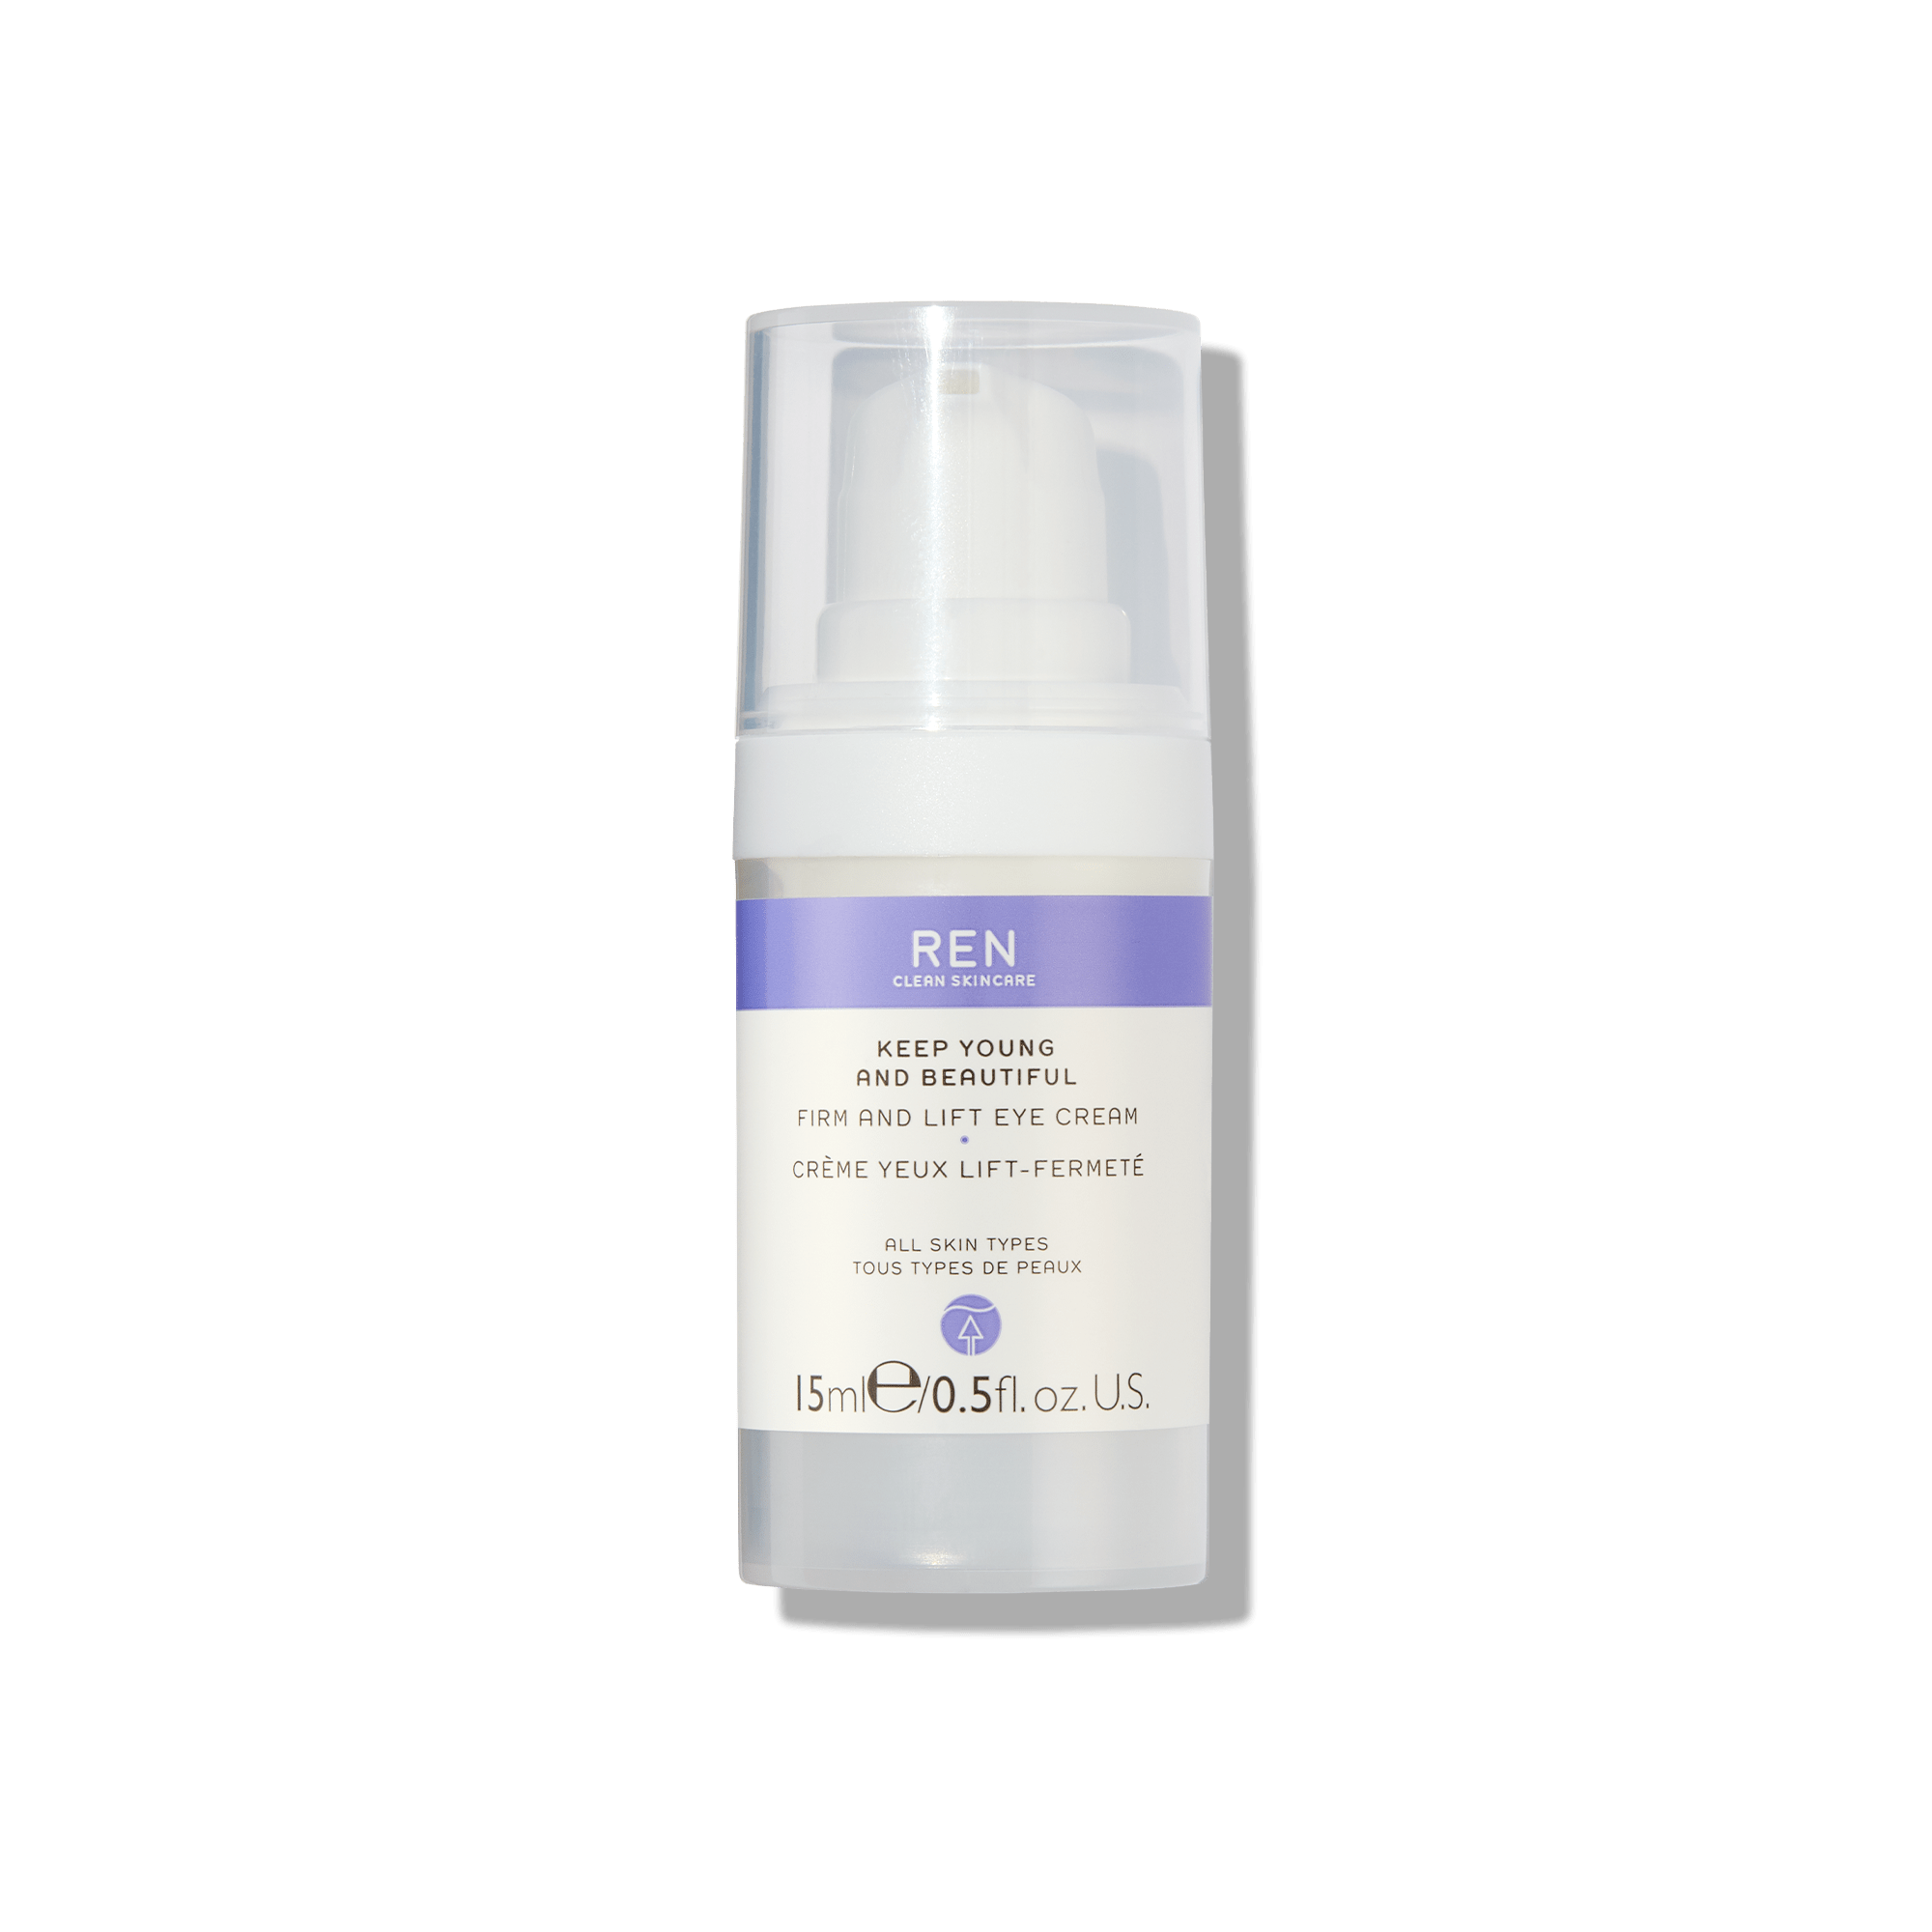 REN Clean Skincare - Keep Young And Beautiful Firm And Lift Eye Cream